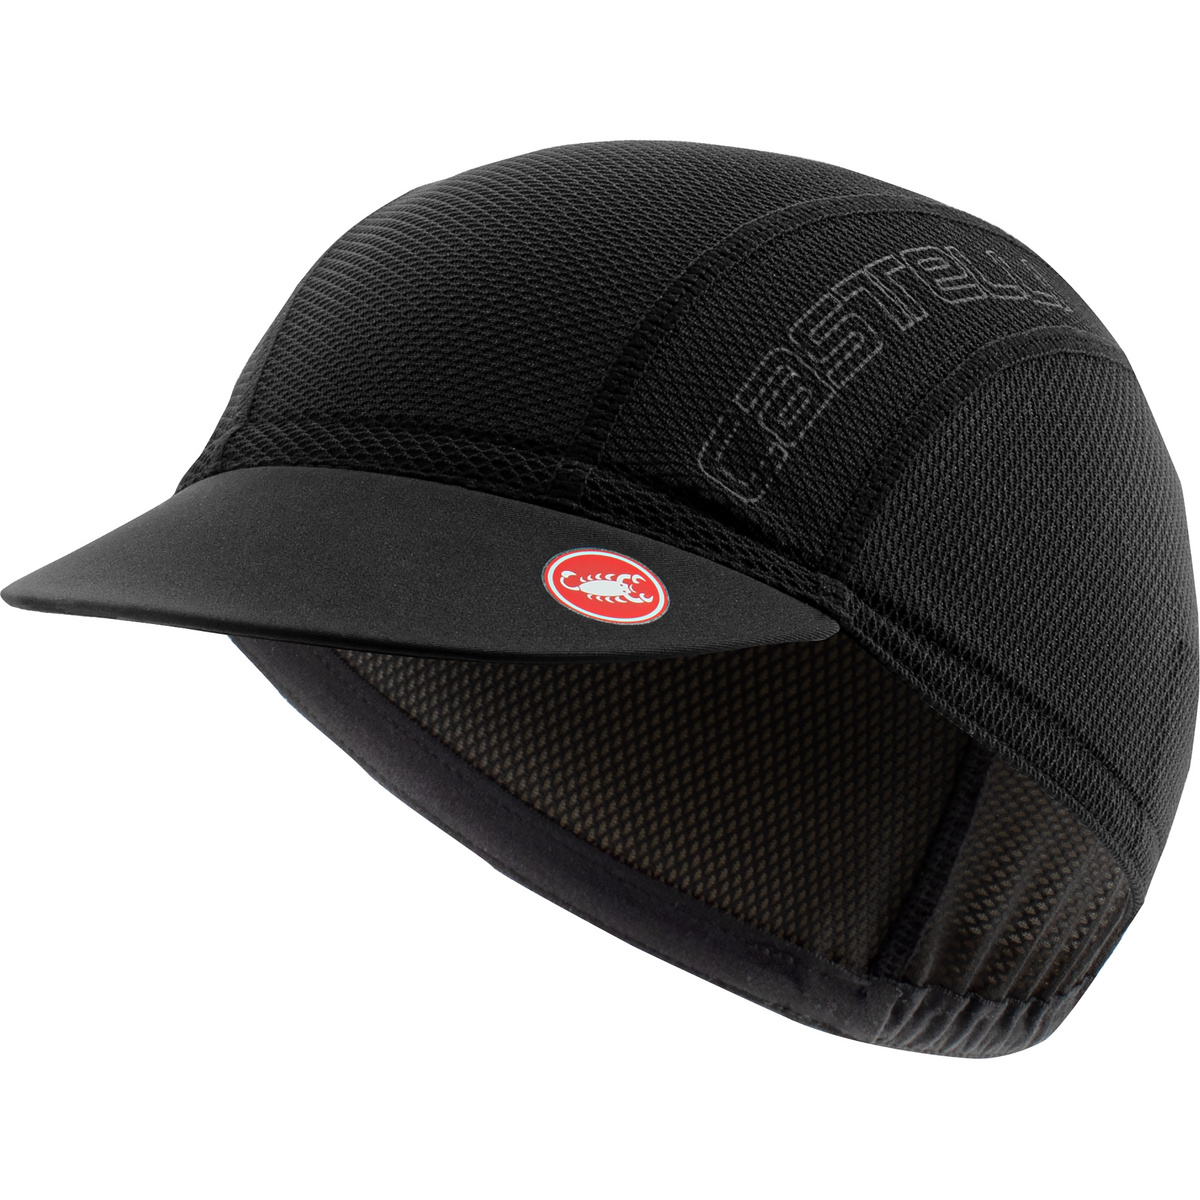 Image of Castelli Cappello A/C 2 Cycling